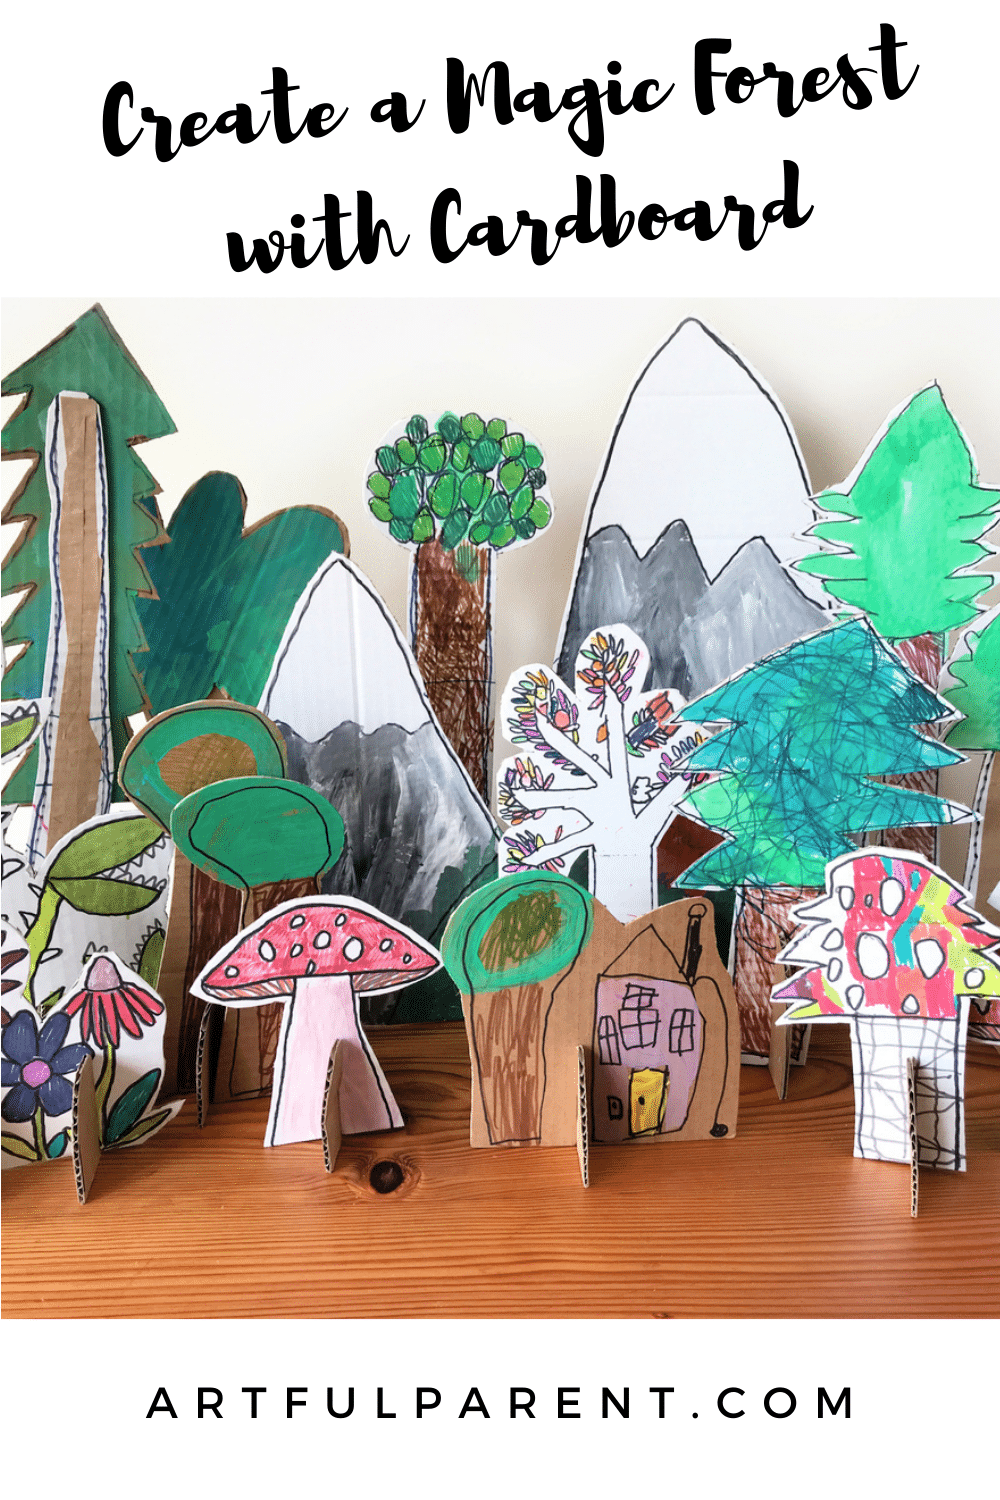 Magic forest with cardboard pinterest